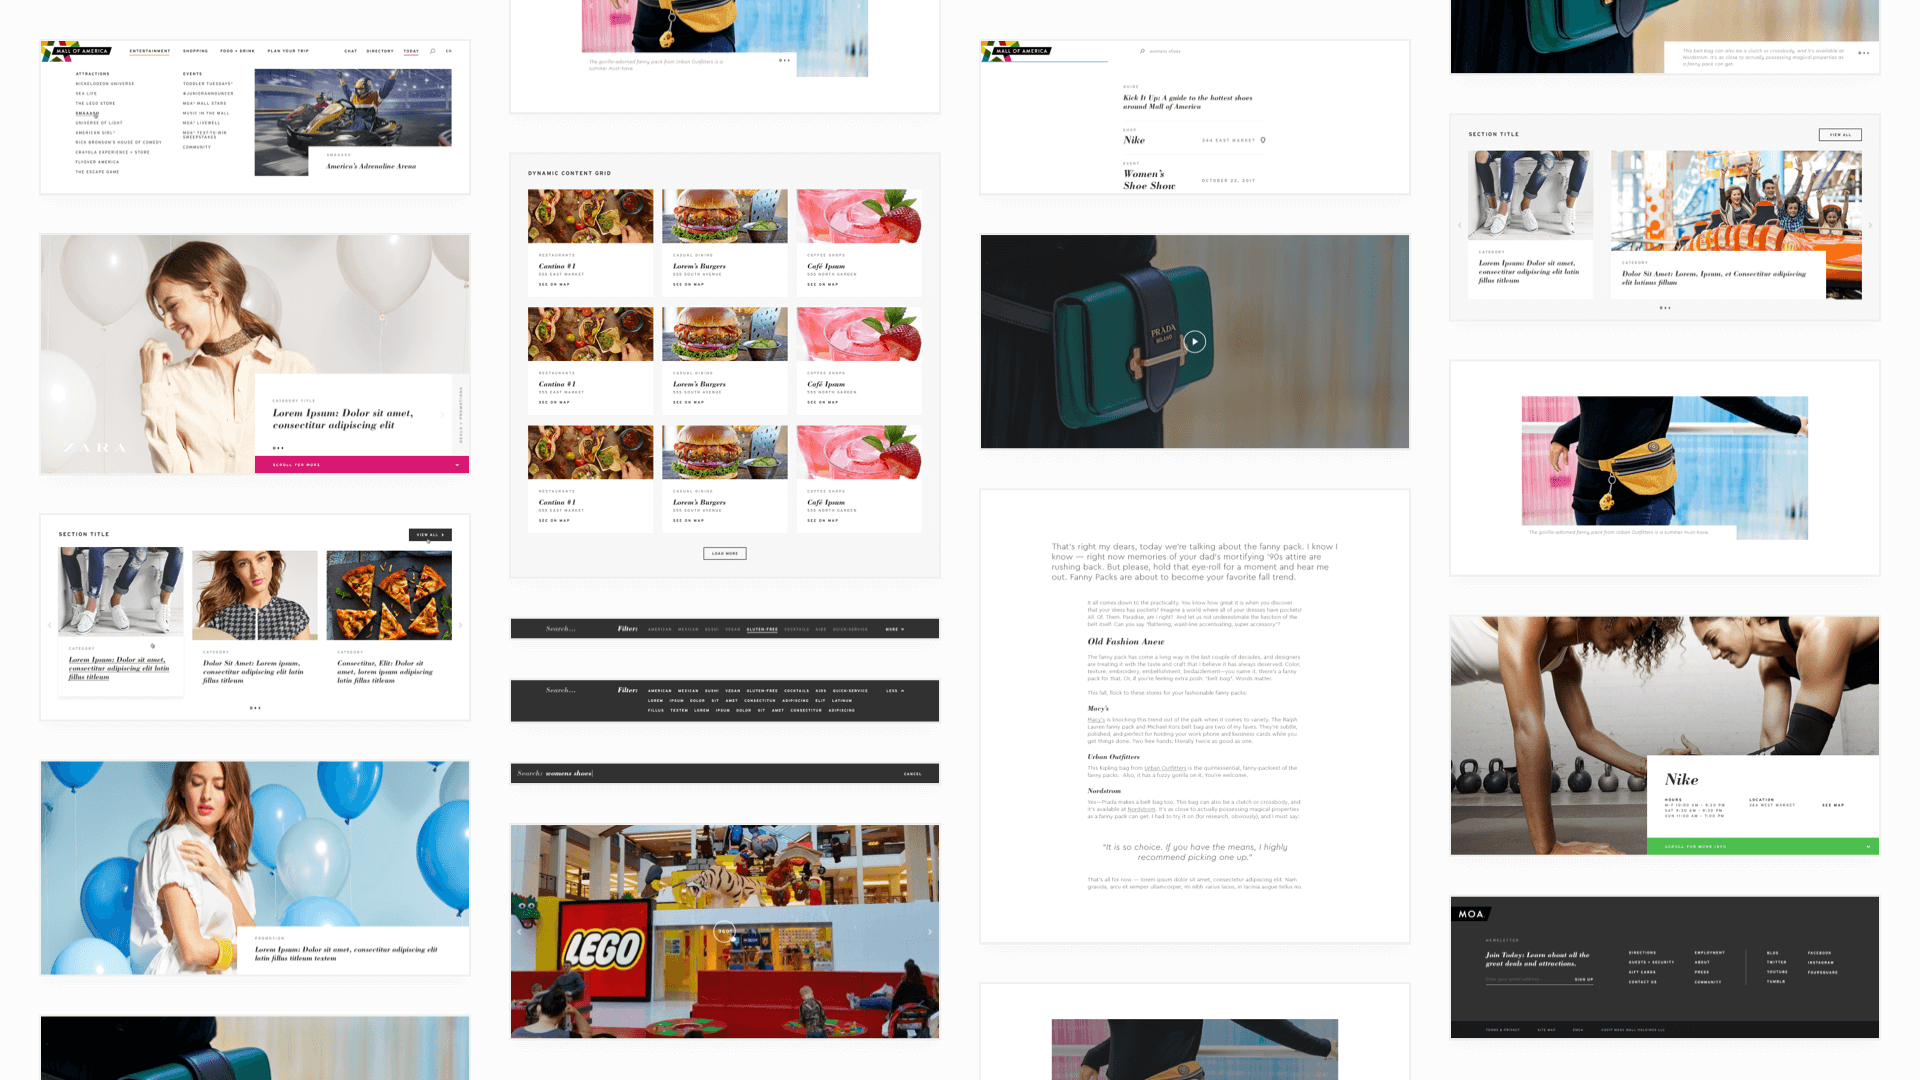 Desktop designs for the modules used on the redesigned Mall of America website